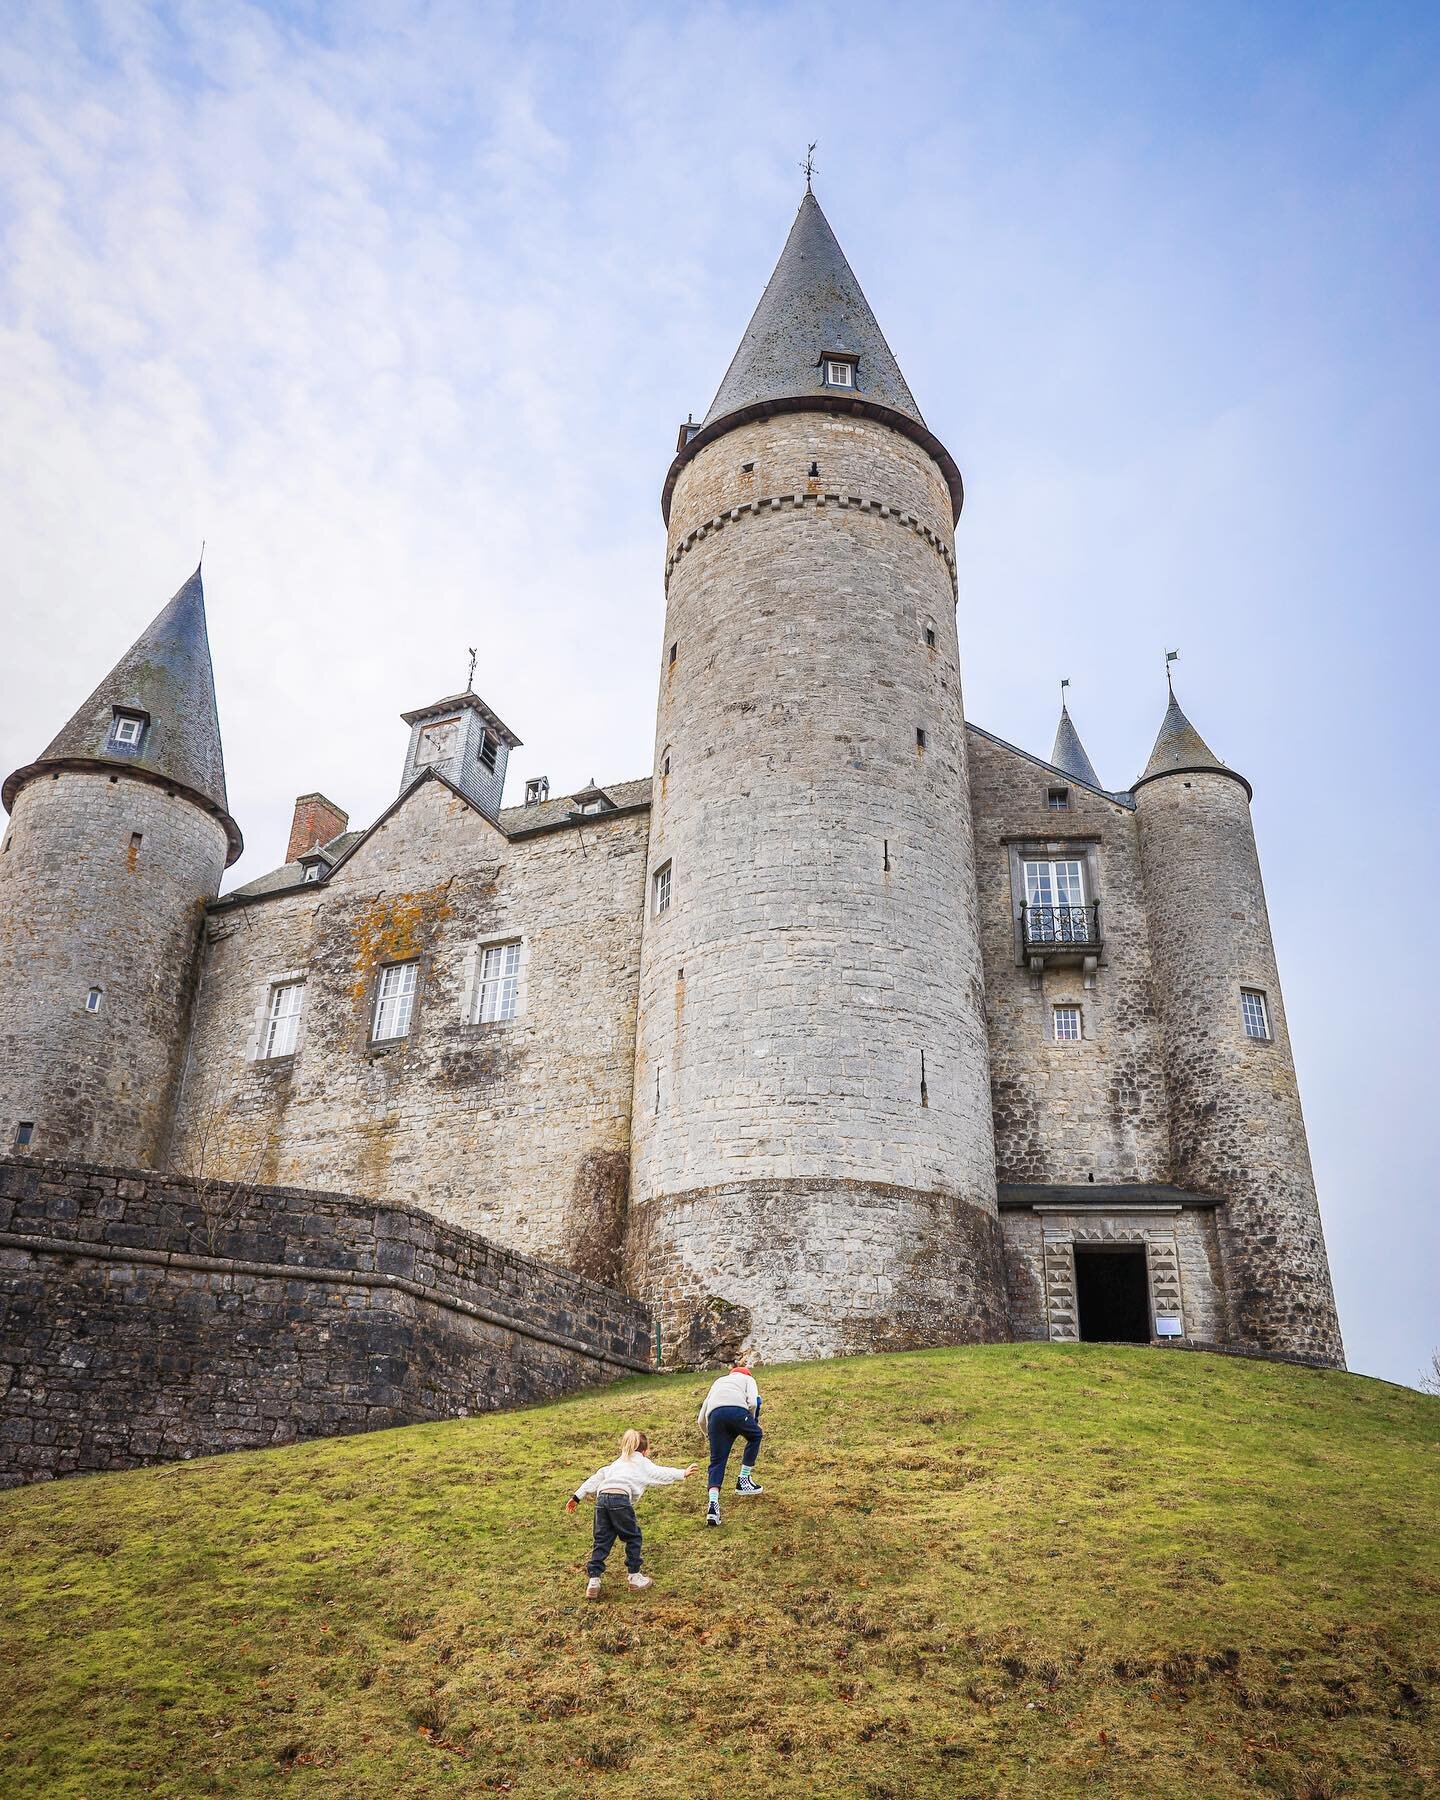 We visited the Chateau de Vêves in Houyet at the beginning of our camper trip. Elodie was beyond amazed that all kids exiting the castle were dressed as princesses or knights so we just hàd to take a look how these kids got their transformation. Tu